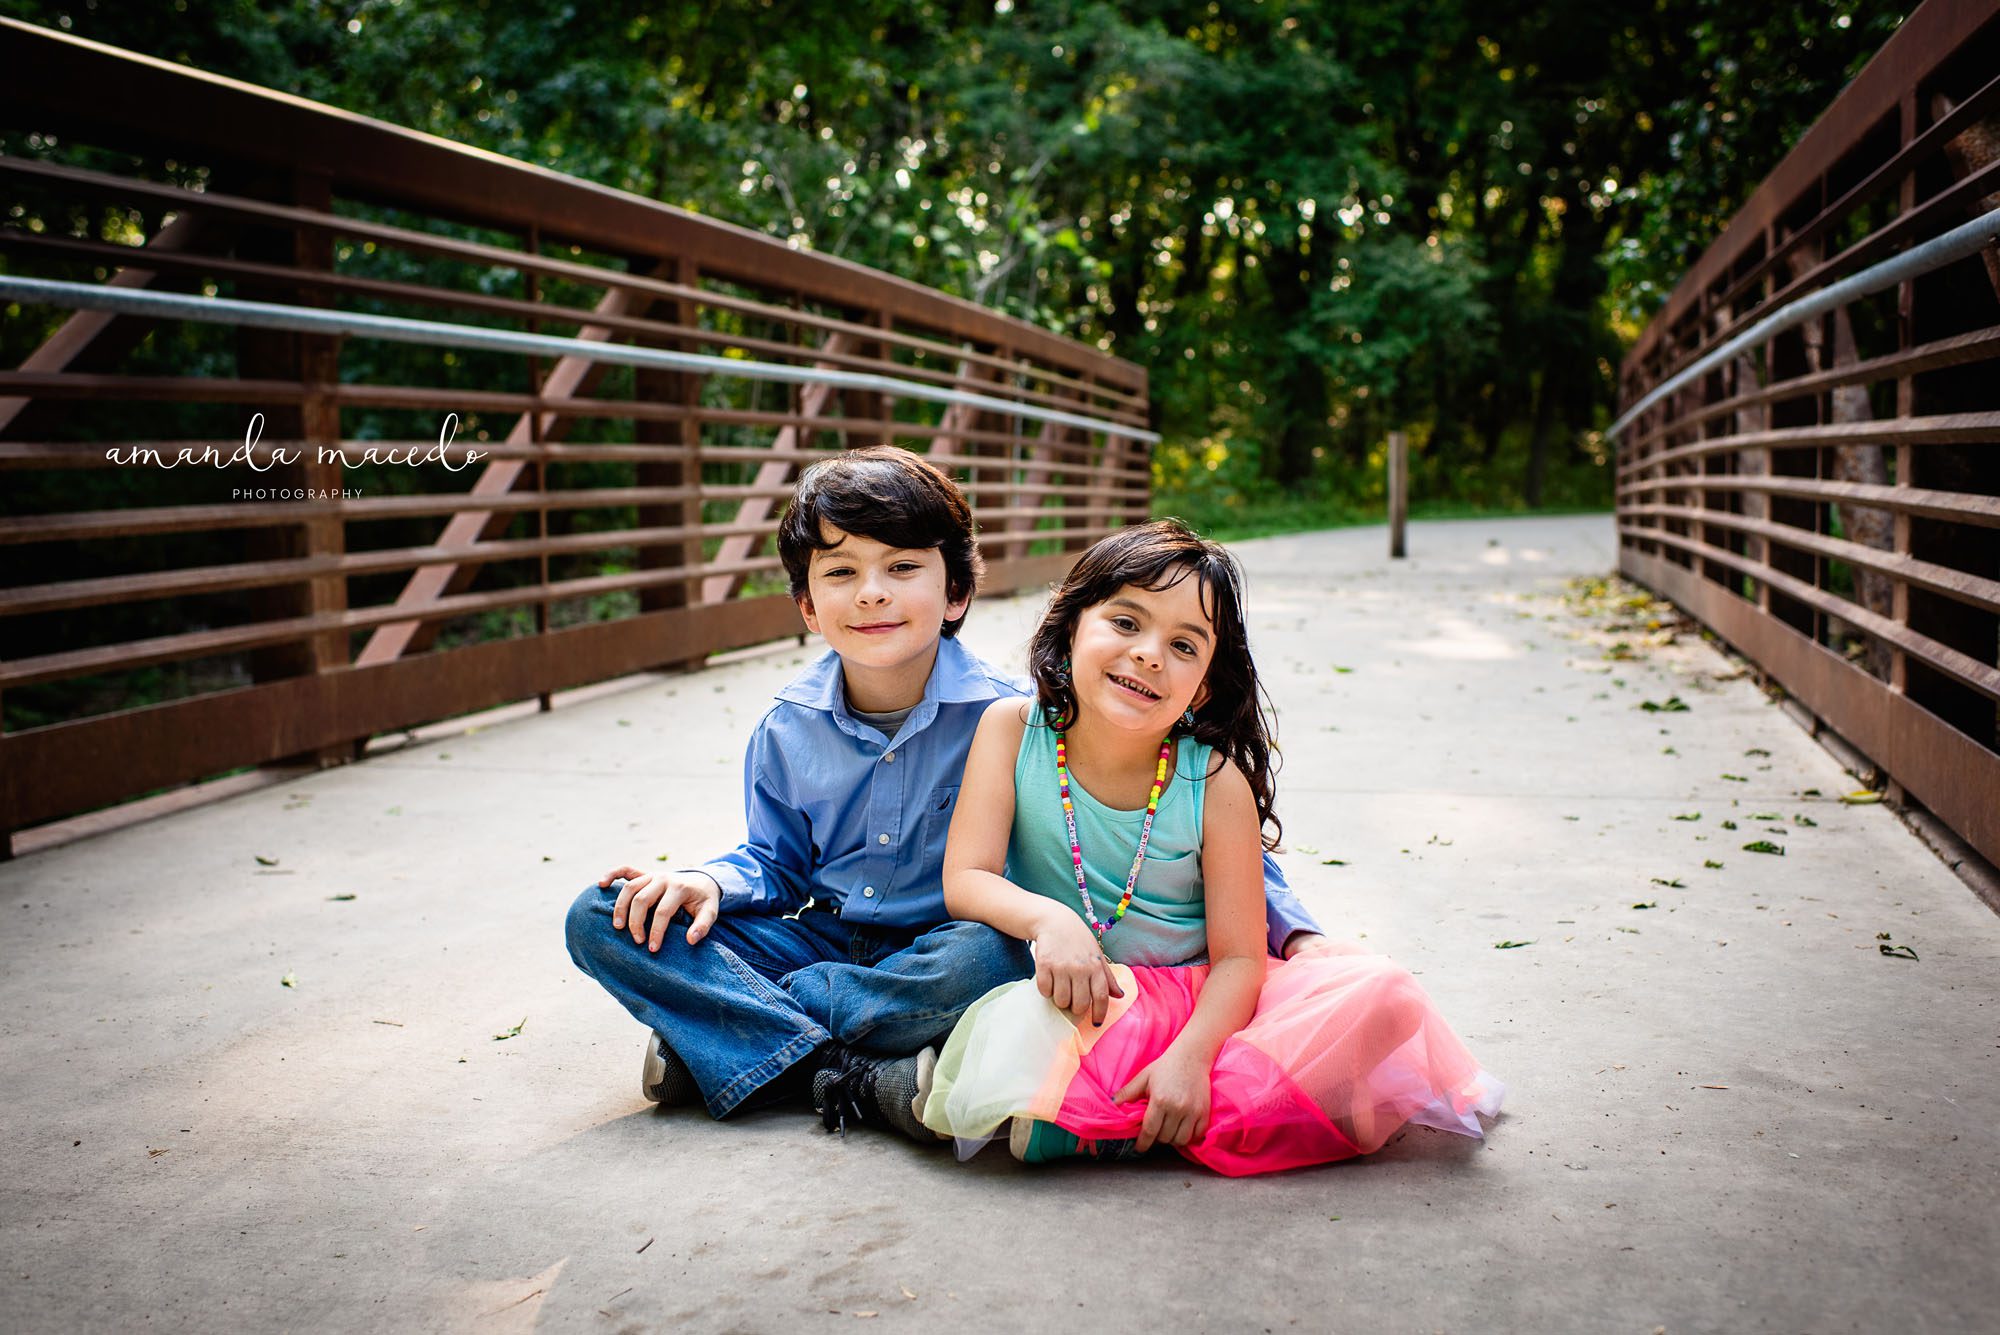 Child photographer, brother and sister on bridge smiling